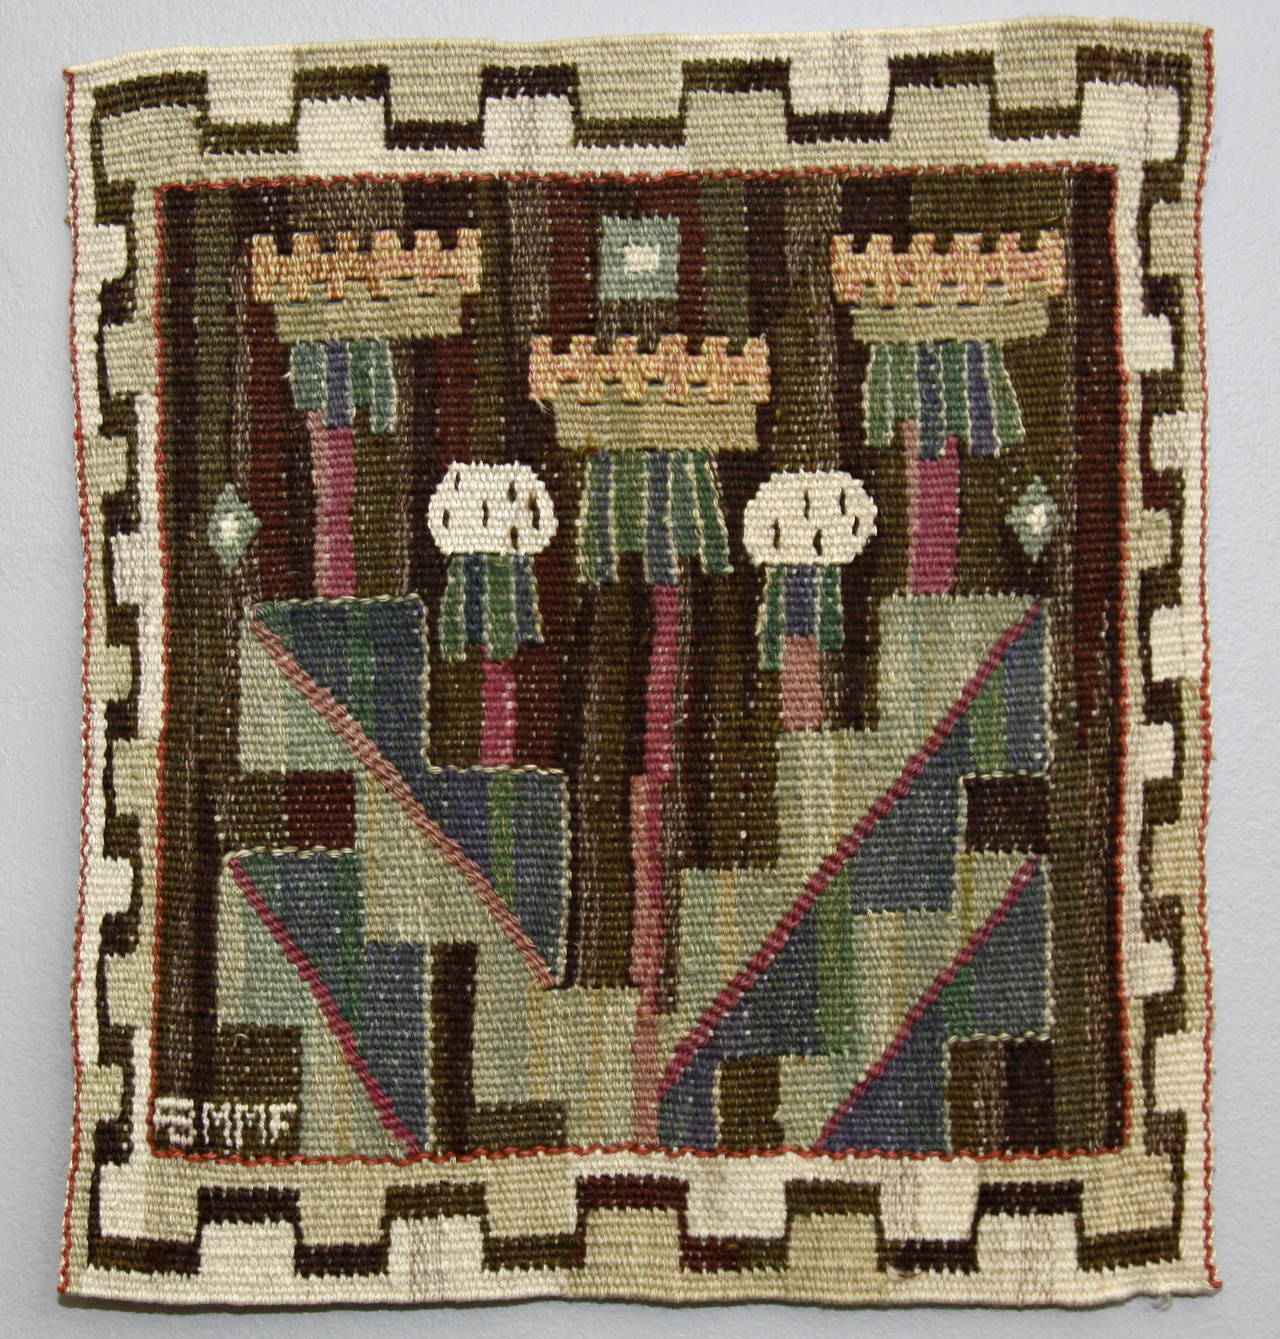 Fantastic early weaving by MMF. Great condition and coloring.